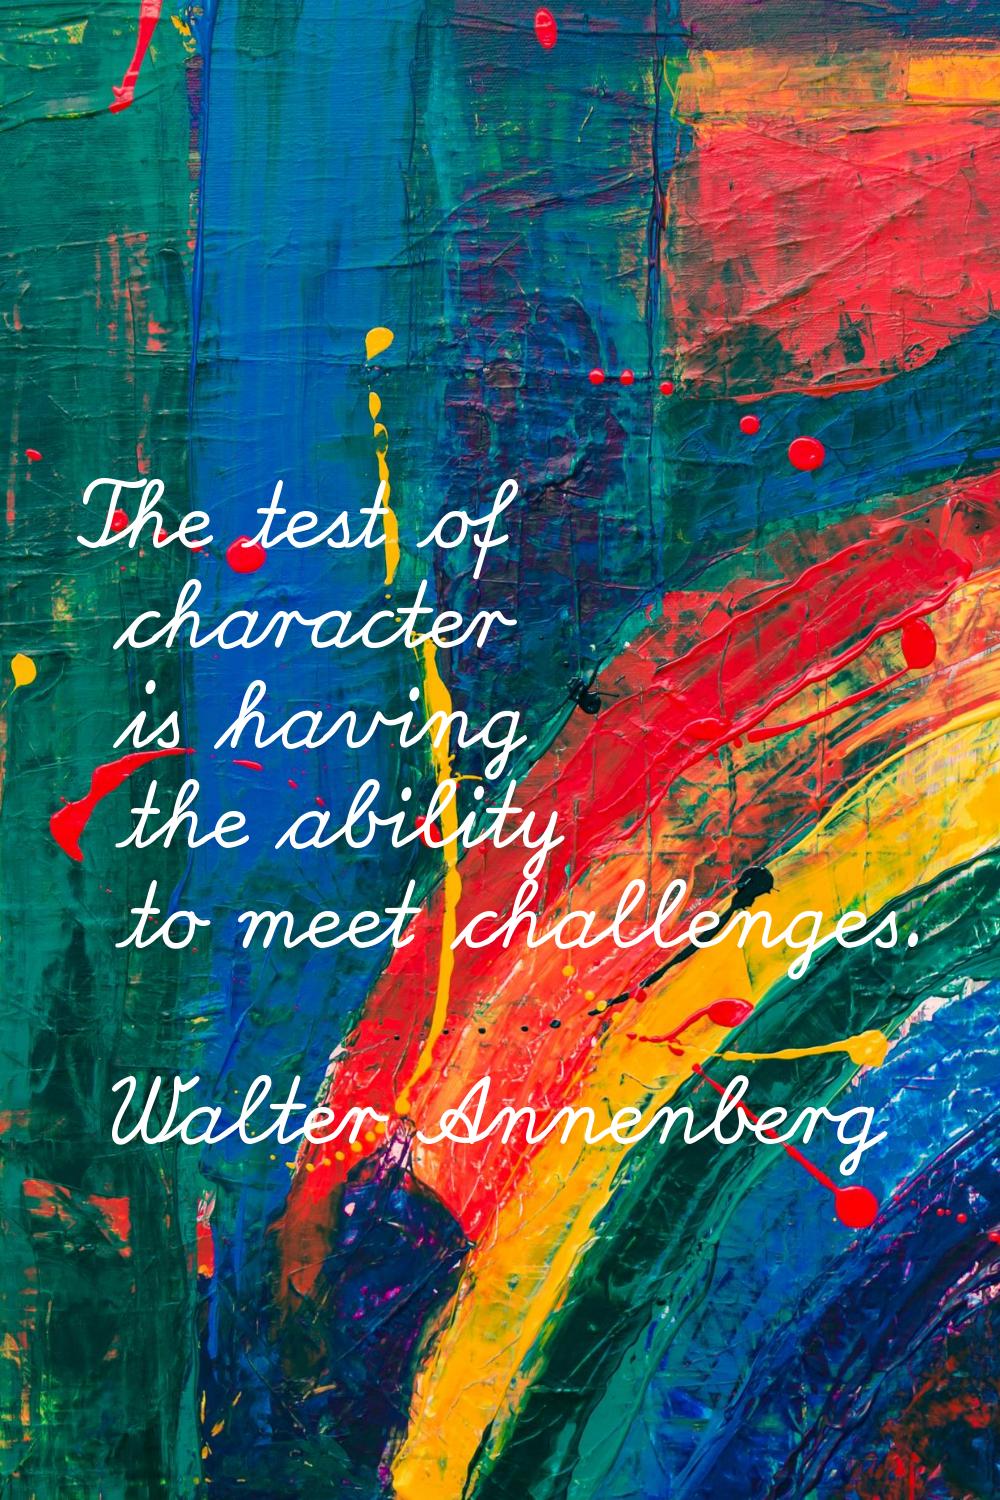 The test of character is having the ability to meet challenges.